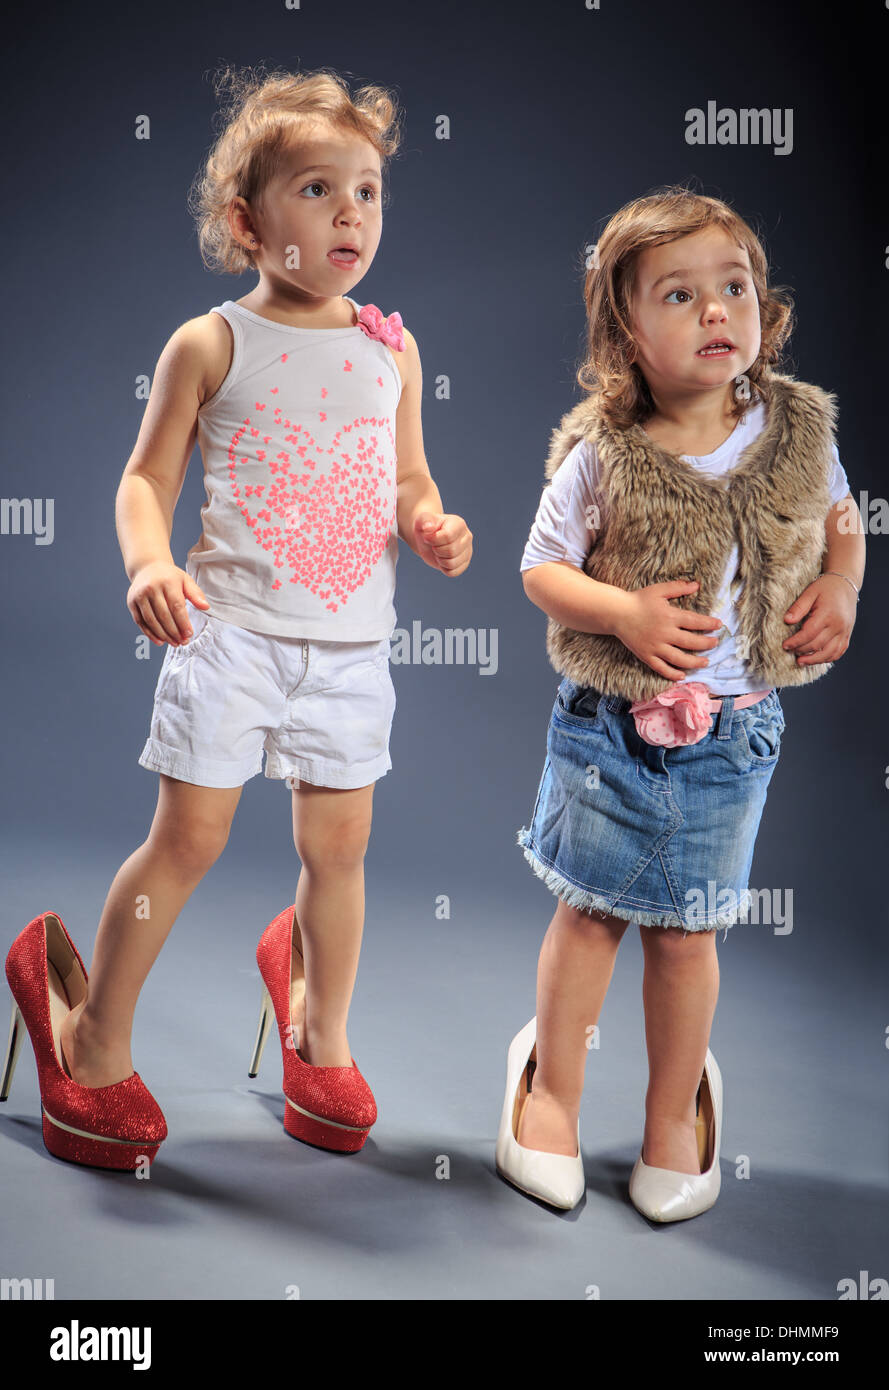 studio shot of two little dressed up girls Stock Photo